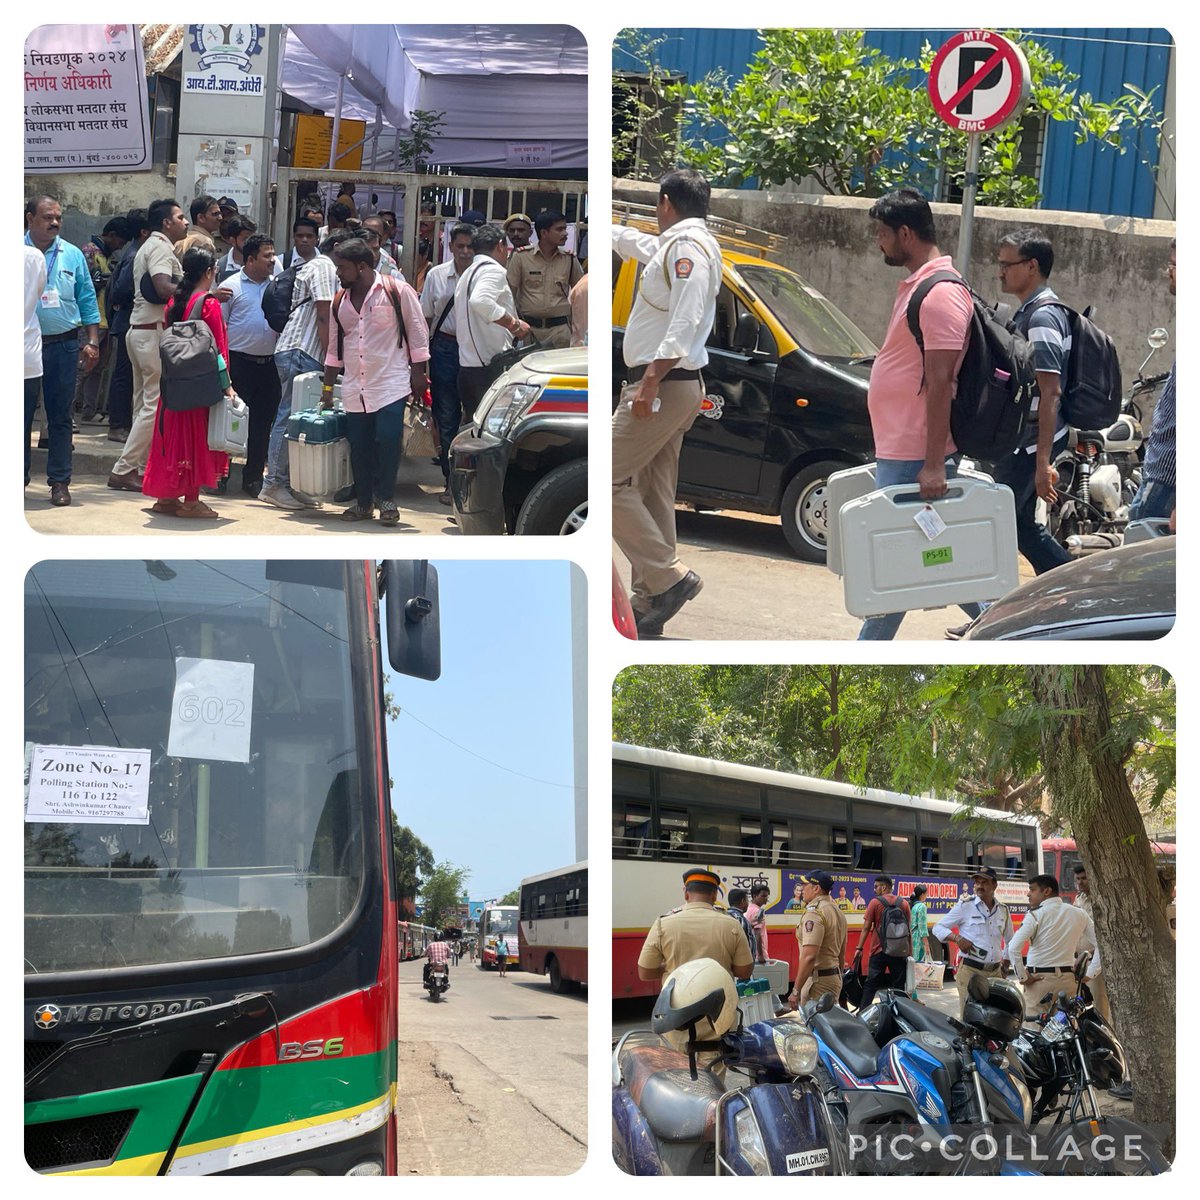 Mumbai gets vote ready! Below (coincidentally in my neighbourhood): 🗳️EVMs being collected from a centralised spot 🗳️ Poll workers carry them into buses assigned to their voting booths 🗳️ all done under heavy security to ensure no funny business (I assume) 🗳️polling day